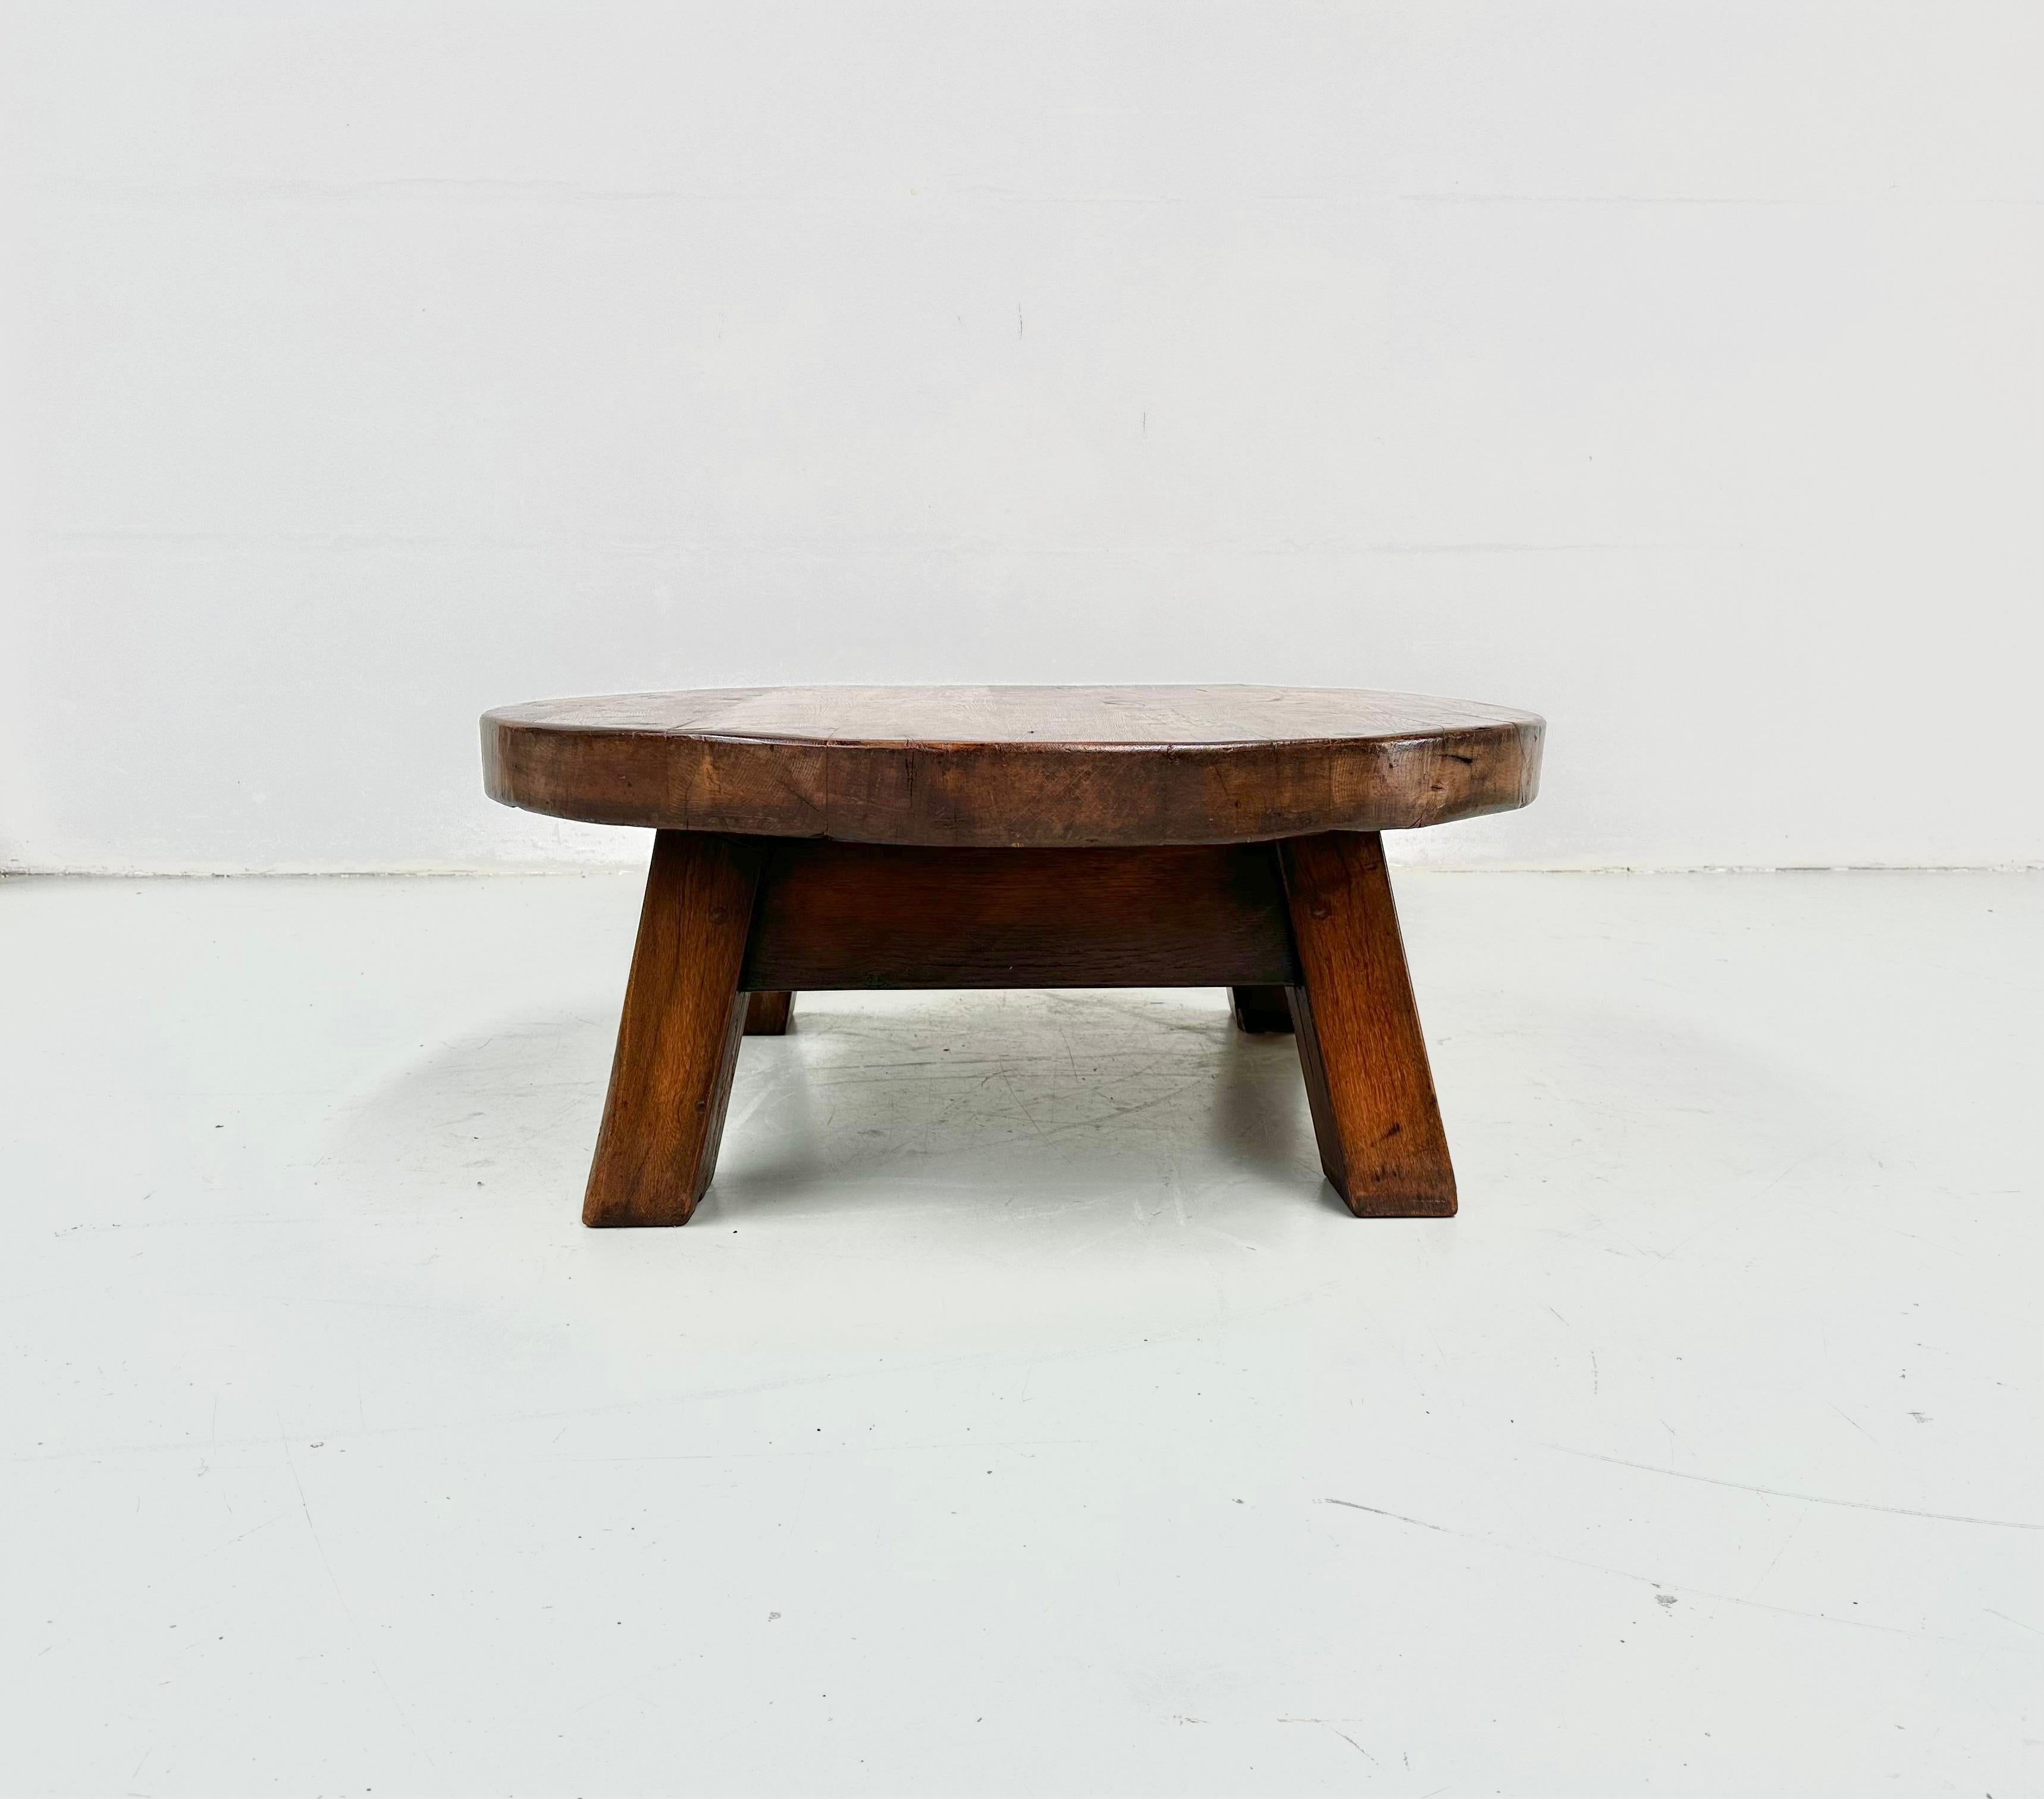 Early 20th Century French Antique Oak Brutalist Round Coffee Table, 1920s. For Sale